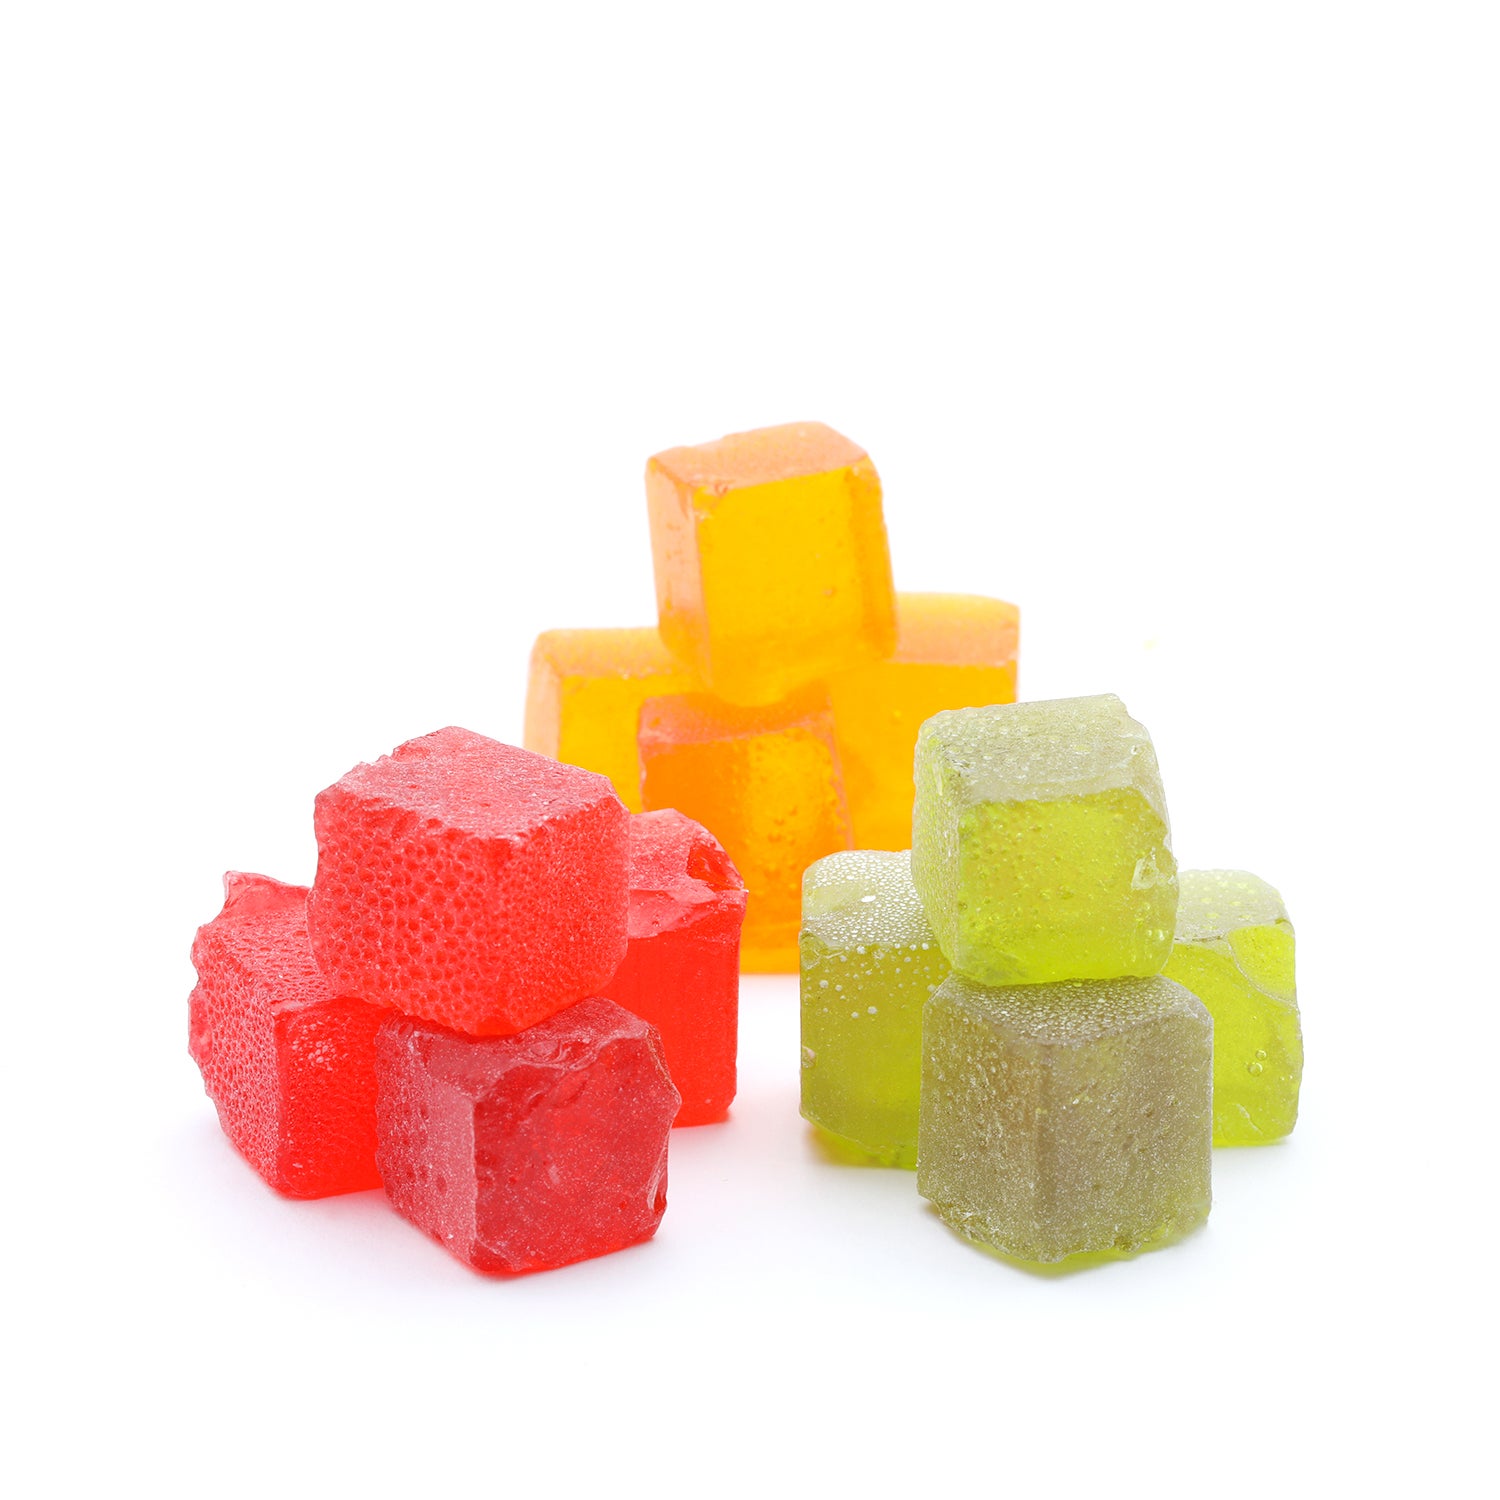 Medicated Hard Candies Group